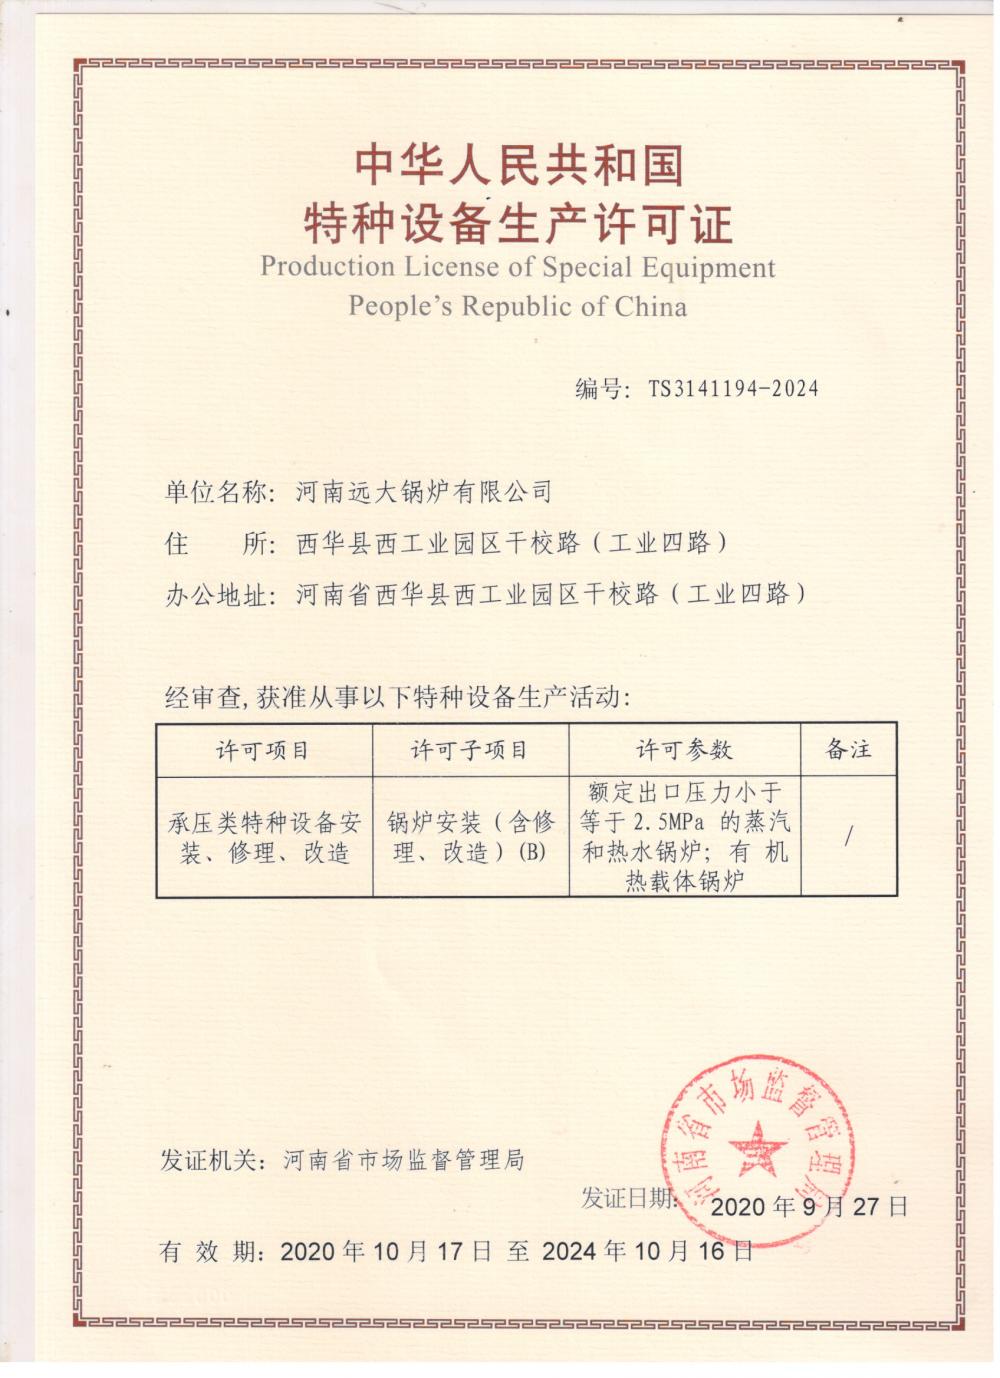 Production License of Special Equopment